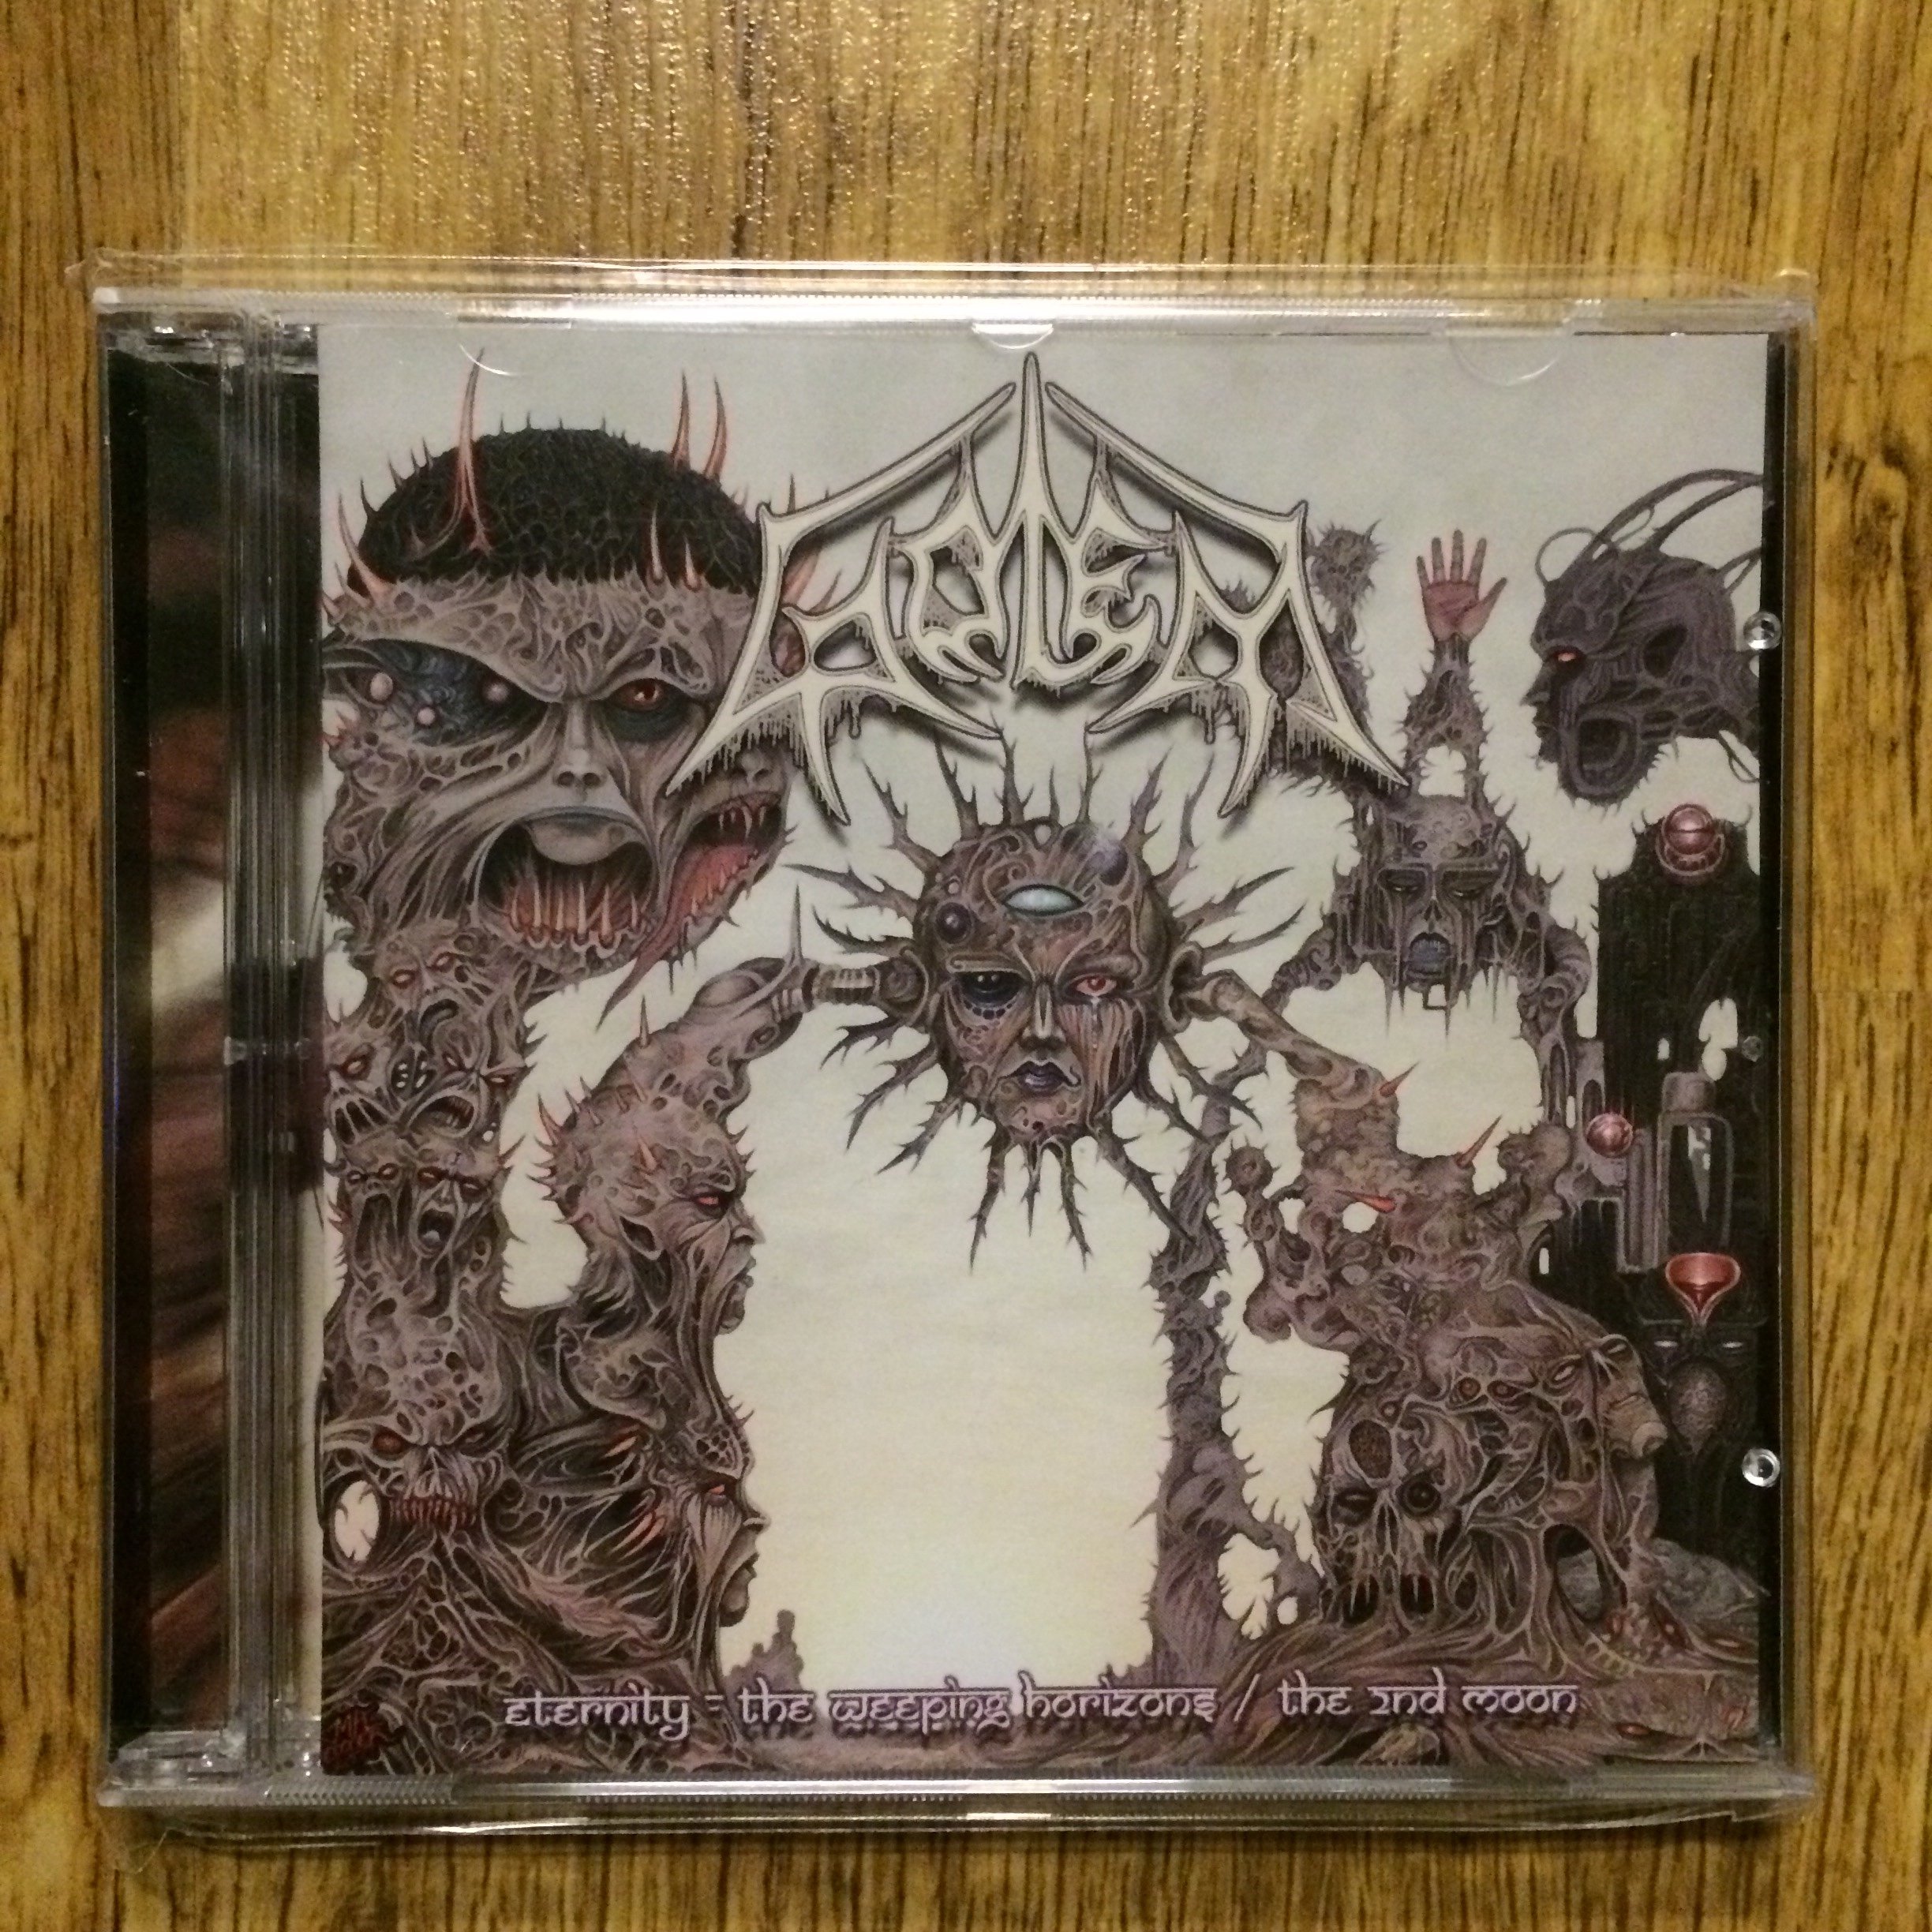 Photo of the Golem - "Eternity: The Weeping / The 2nd Moon" 2CD